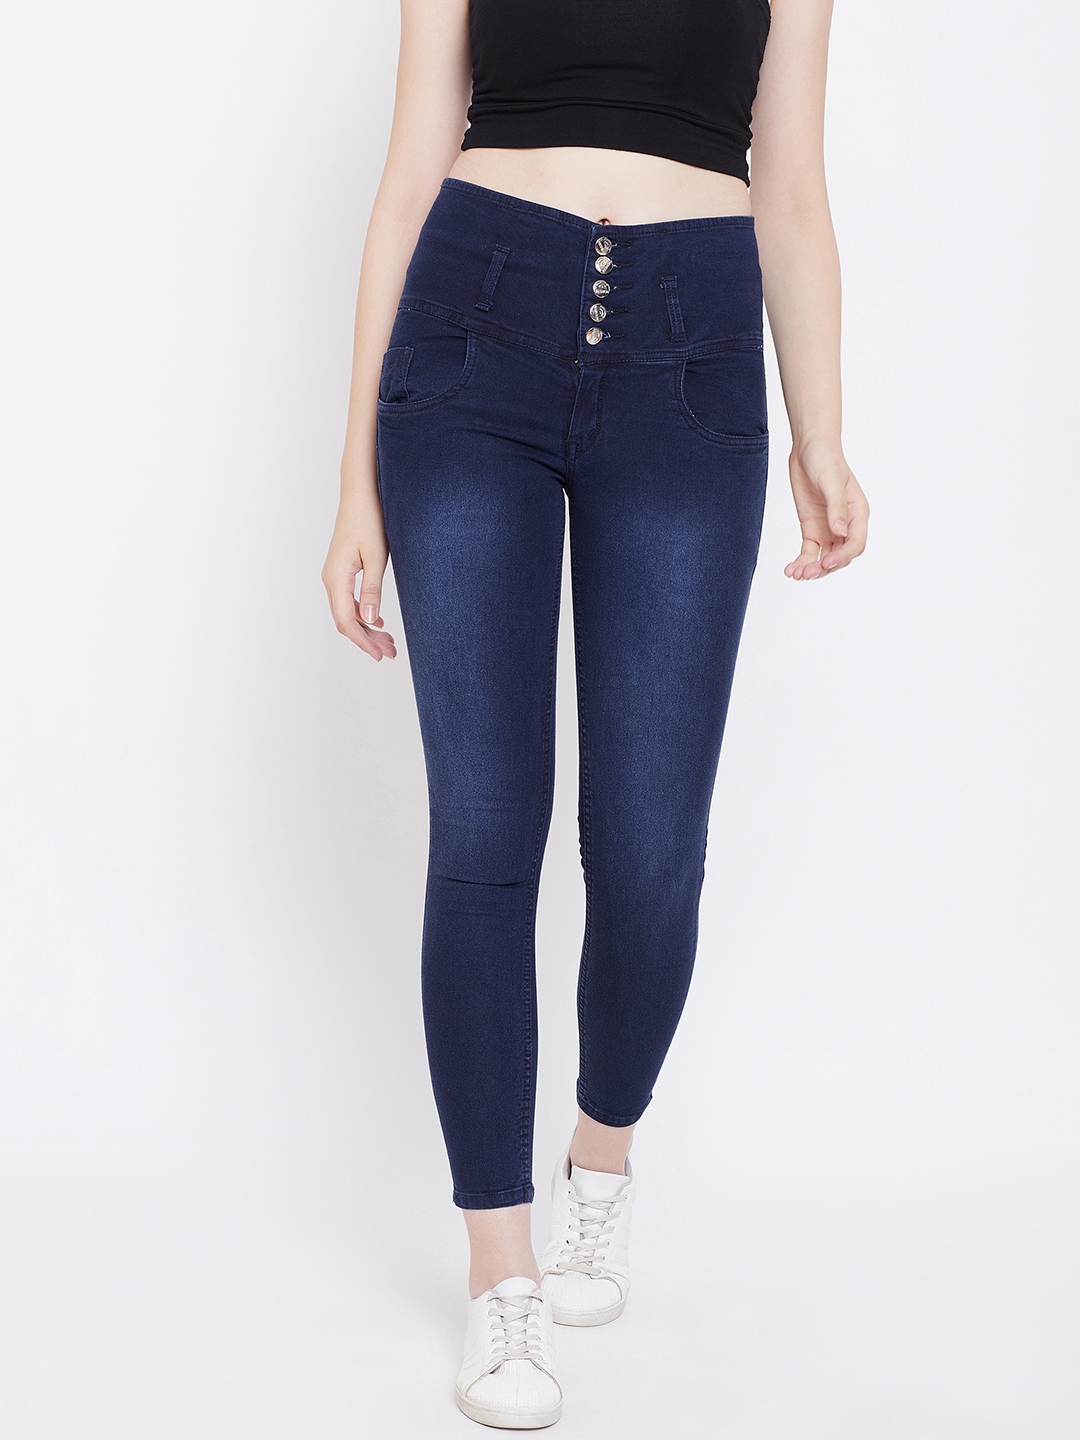 Nifty | Nifty Women's Jeans